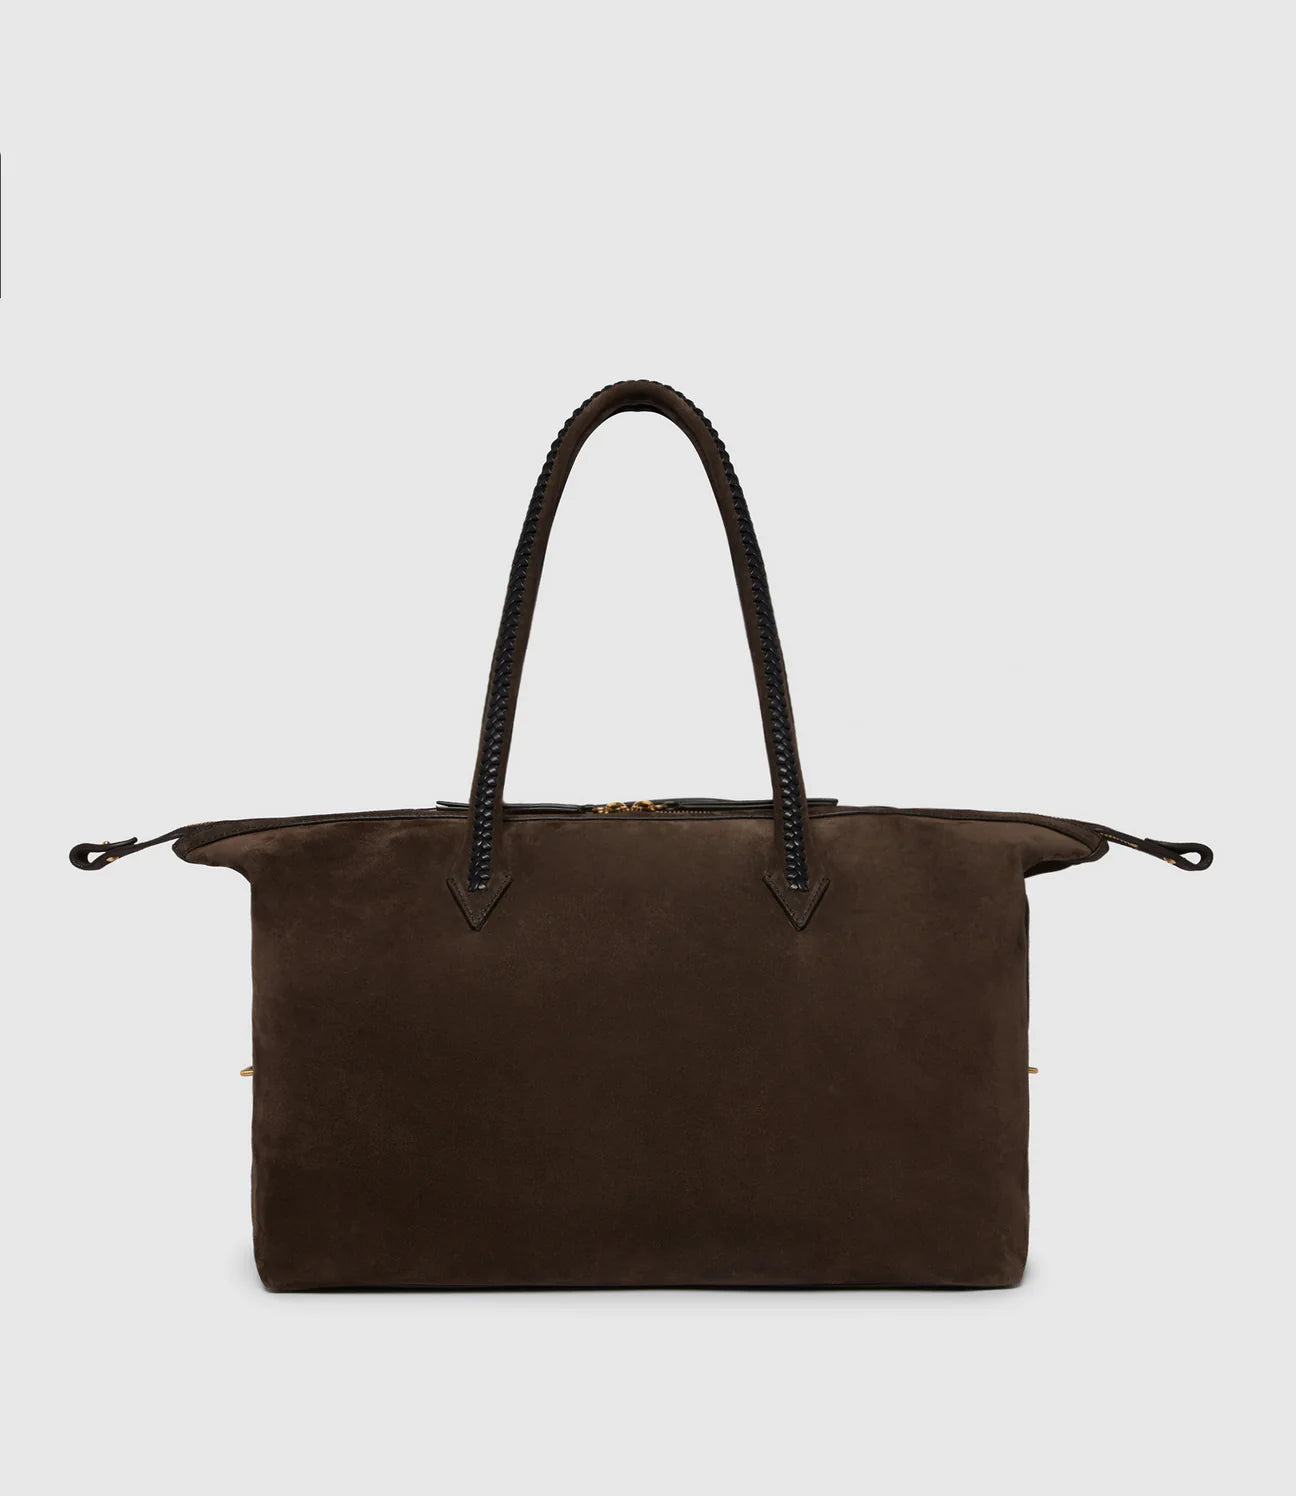 Perriand All Day in Suede and Calfskin, Chocolate and Black